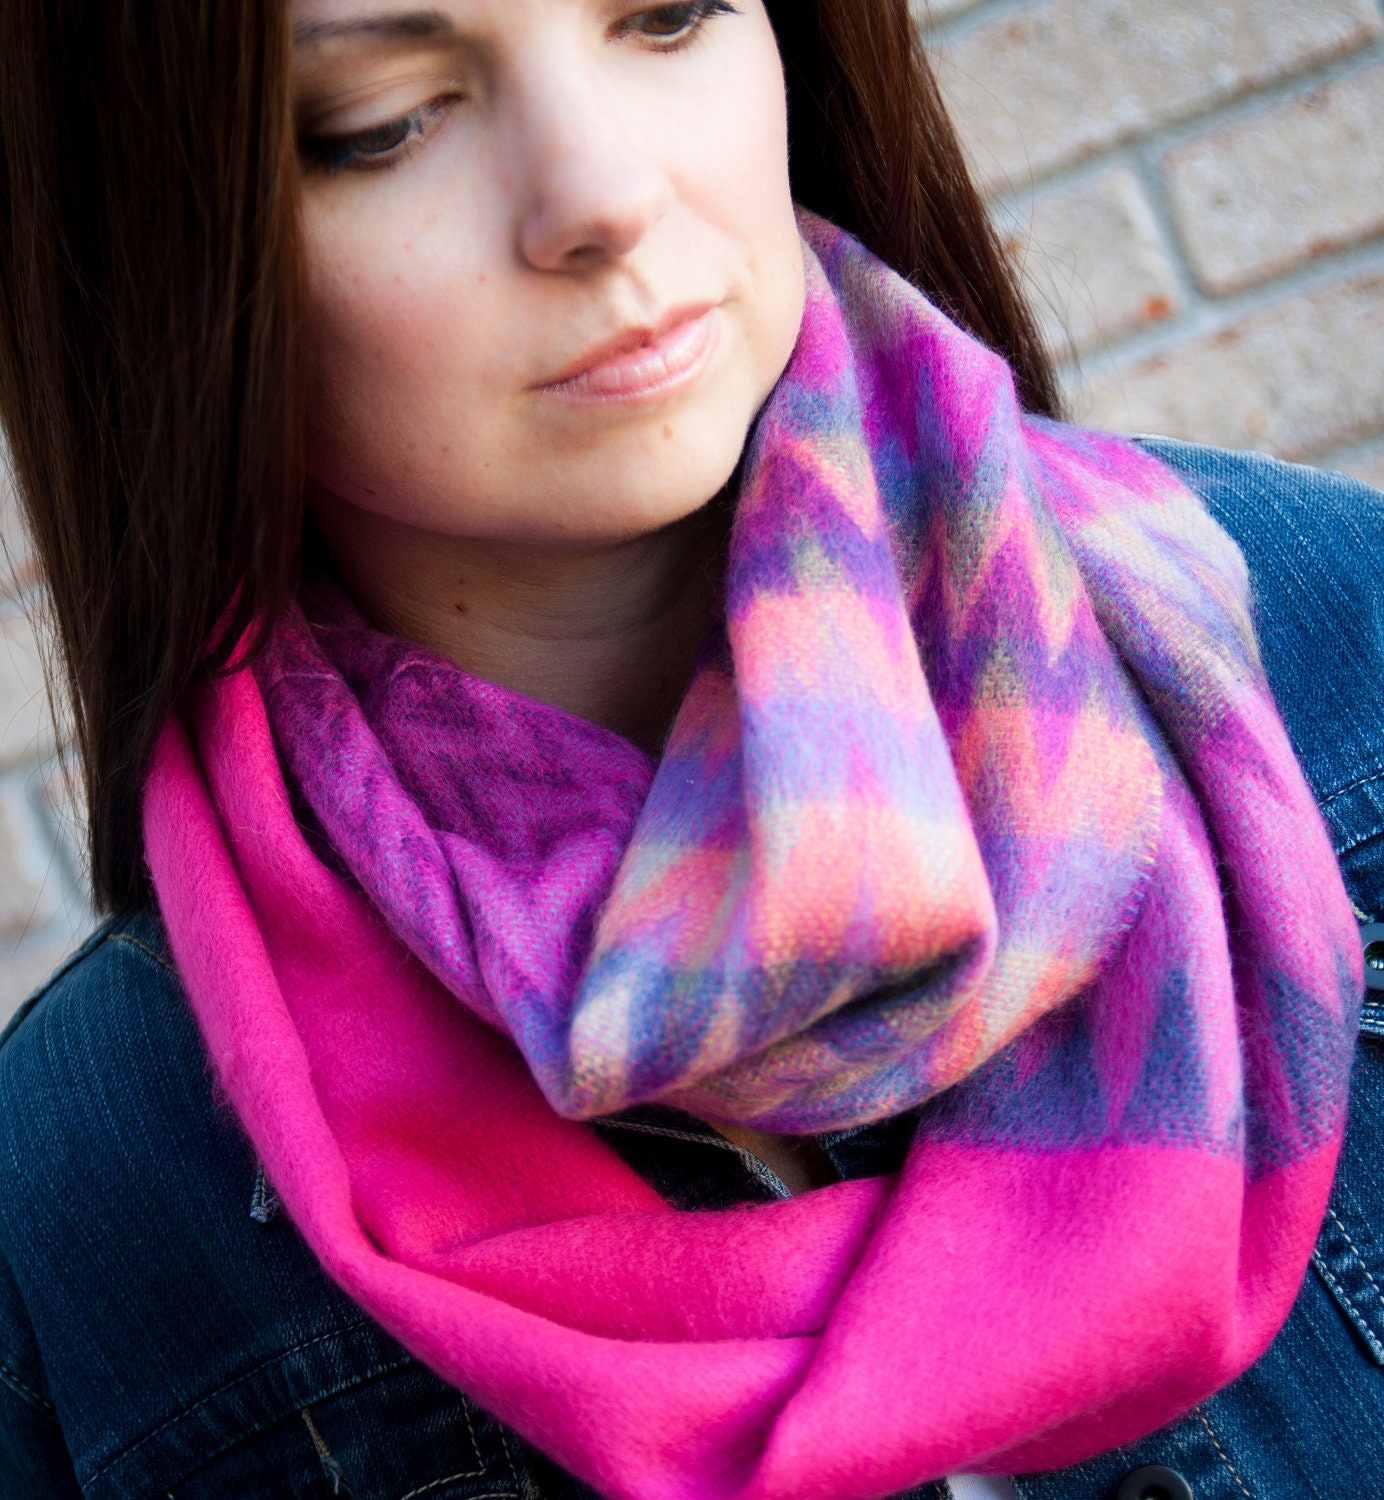 Infinity Scarf - Cozy Warm Infinity Scarf, Color Block Scarf, Chunky Circle Scarf in Hot Pink, Black or Orange